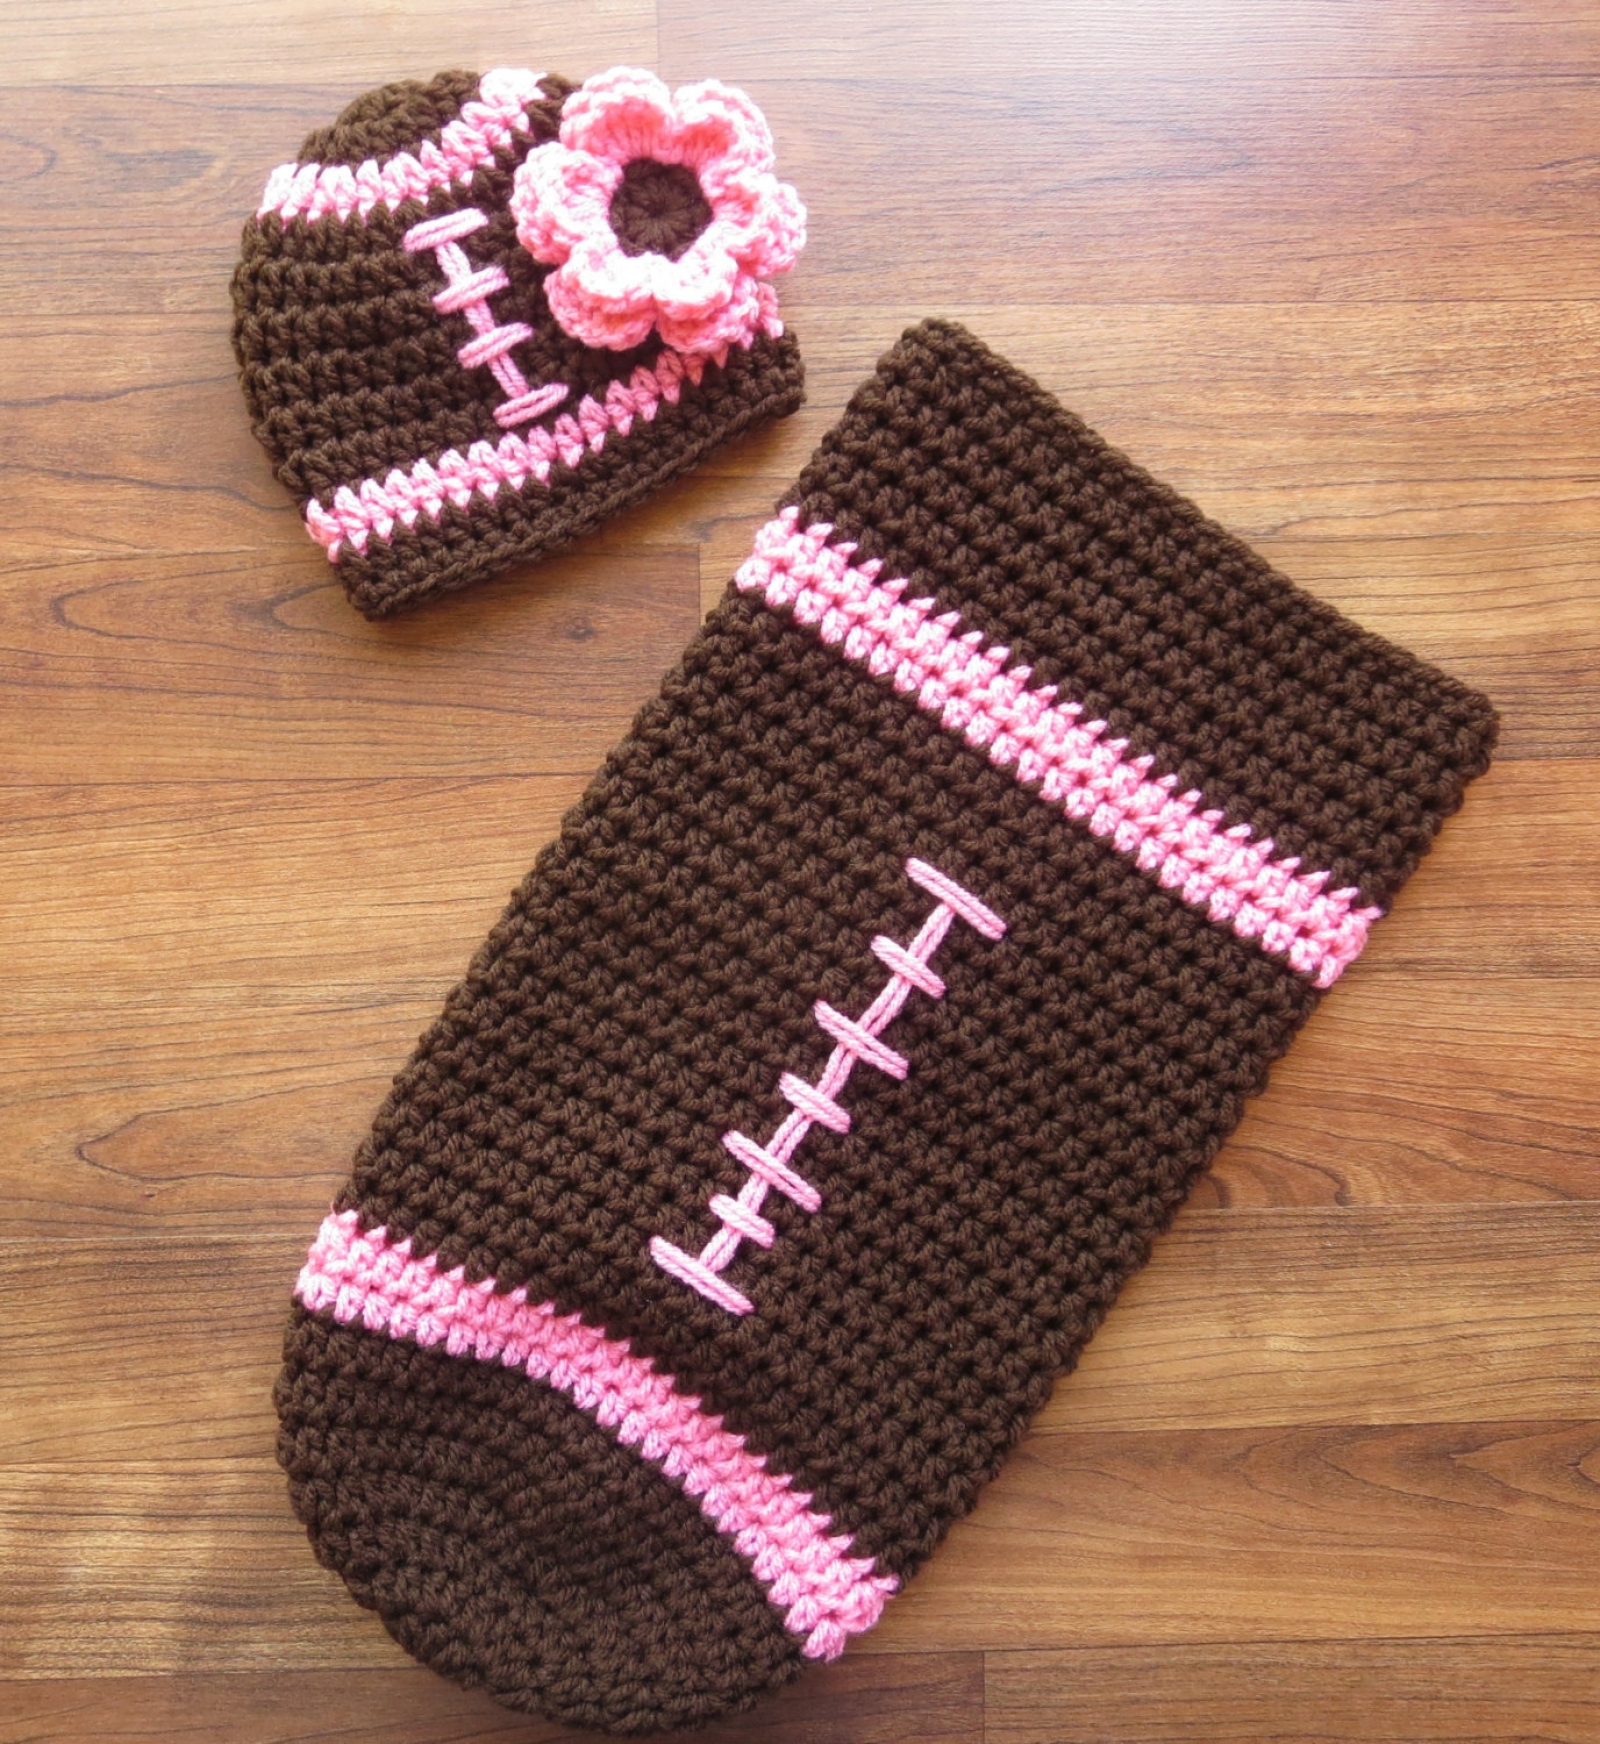 Crocheted Baby Girl Football Cocoon & Hat with Flower - Chocolate ...